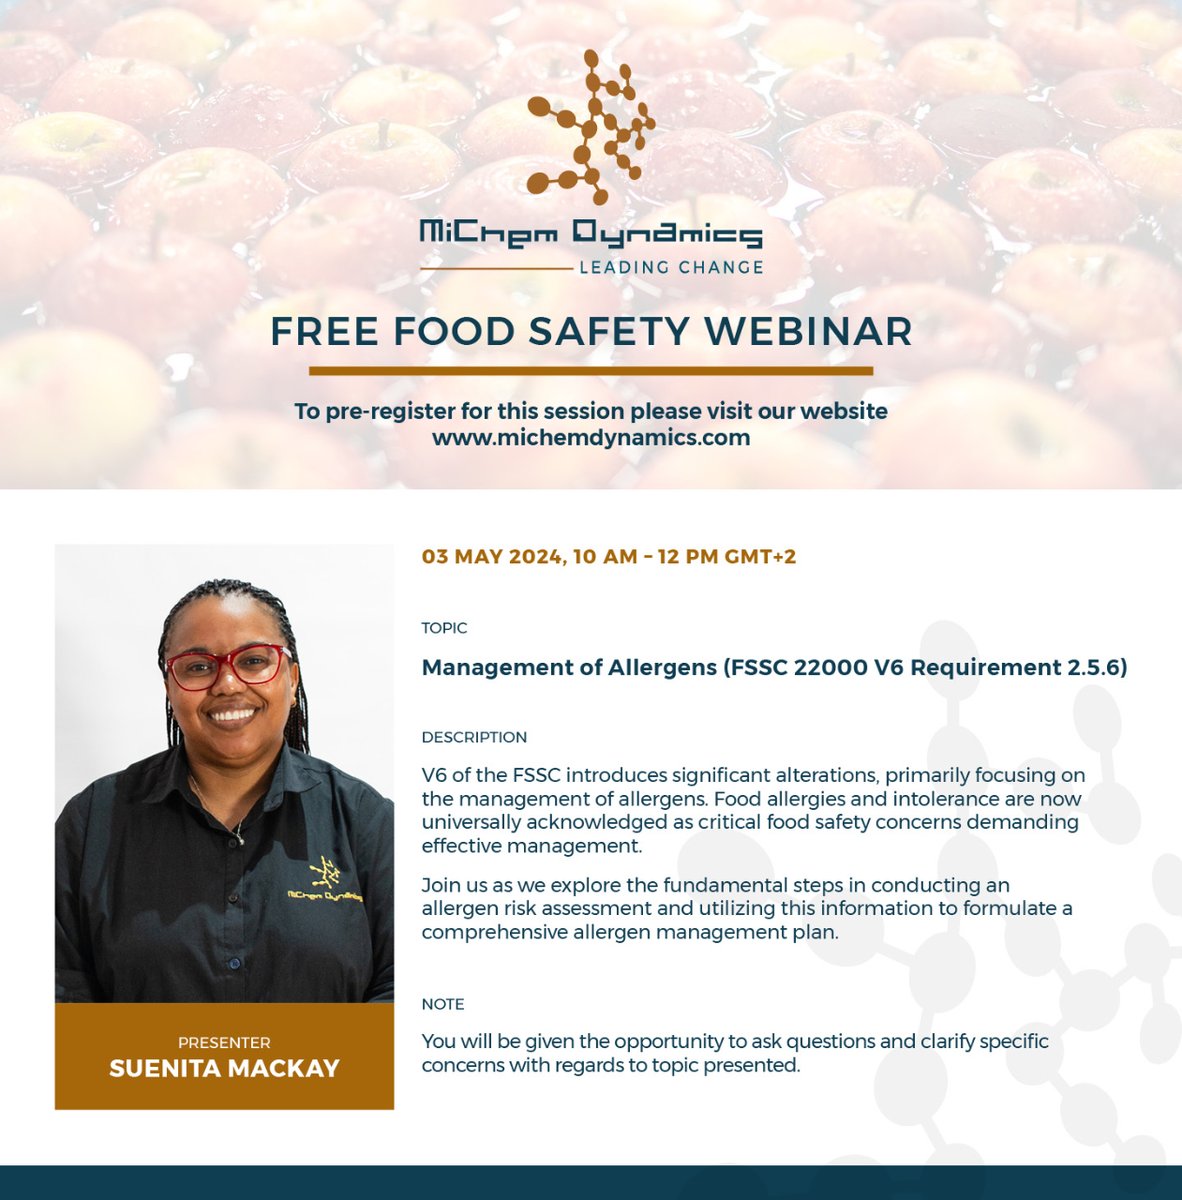 OUR FREE FOOD SAFETY WEBINAR SERIES FOR 2024 CONTINUES! Don’t miss out! Register here: us02web.zoom.us/webinar/regist…  Visit our website to pre-register for all our upcoming free food safety webinars: michemdynamics.com/food-safety-se…  #creatingabetterfuture #foodsafety #foodsafetyculture